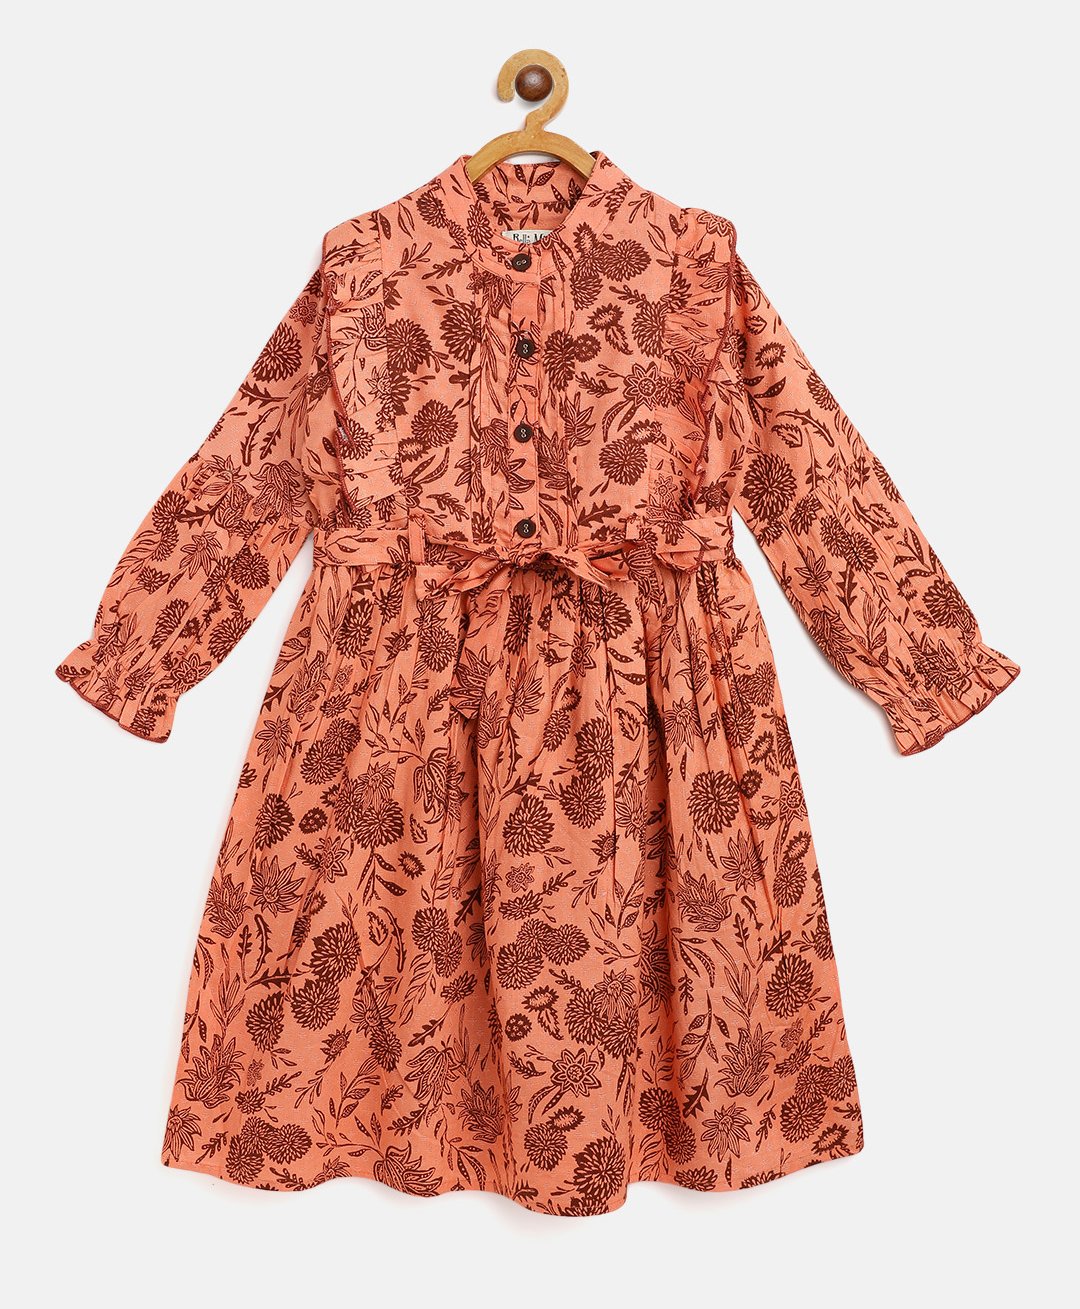 Bella Moda Full Sleeves Floral Print Dress - Orange for Girls (10-11 Years) Online in India, Shop FirstCry.com - 9892423